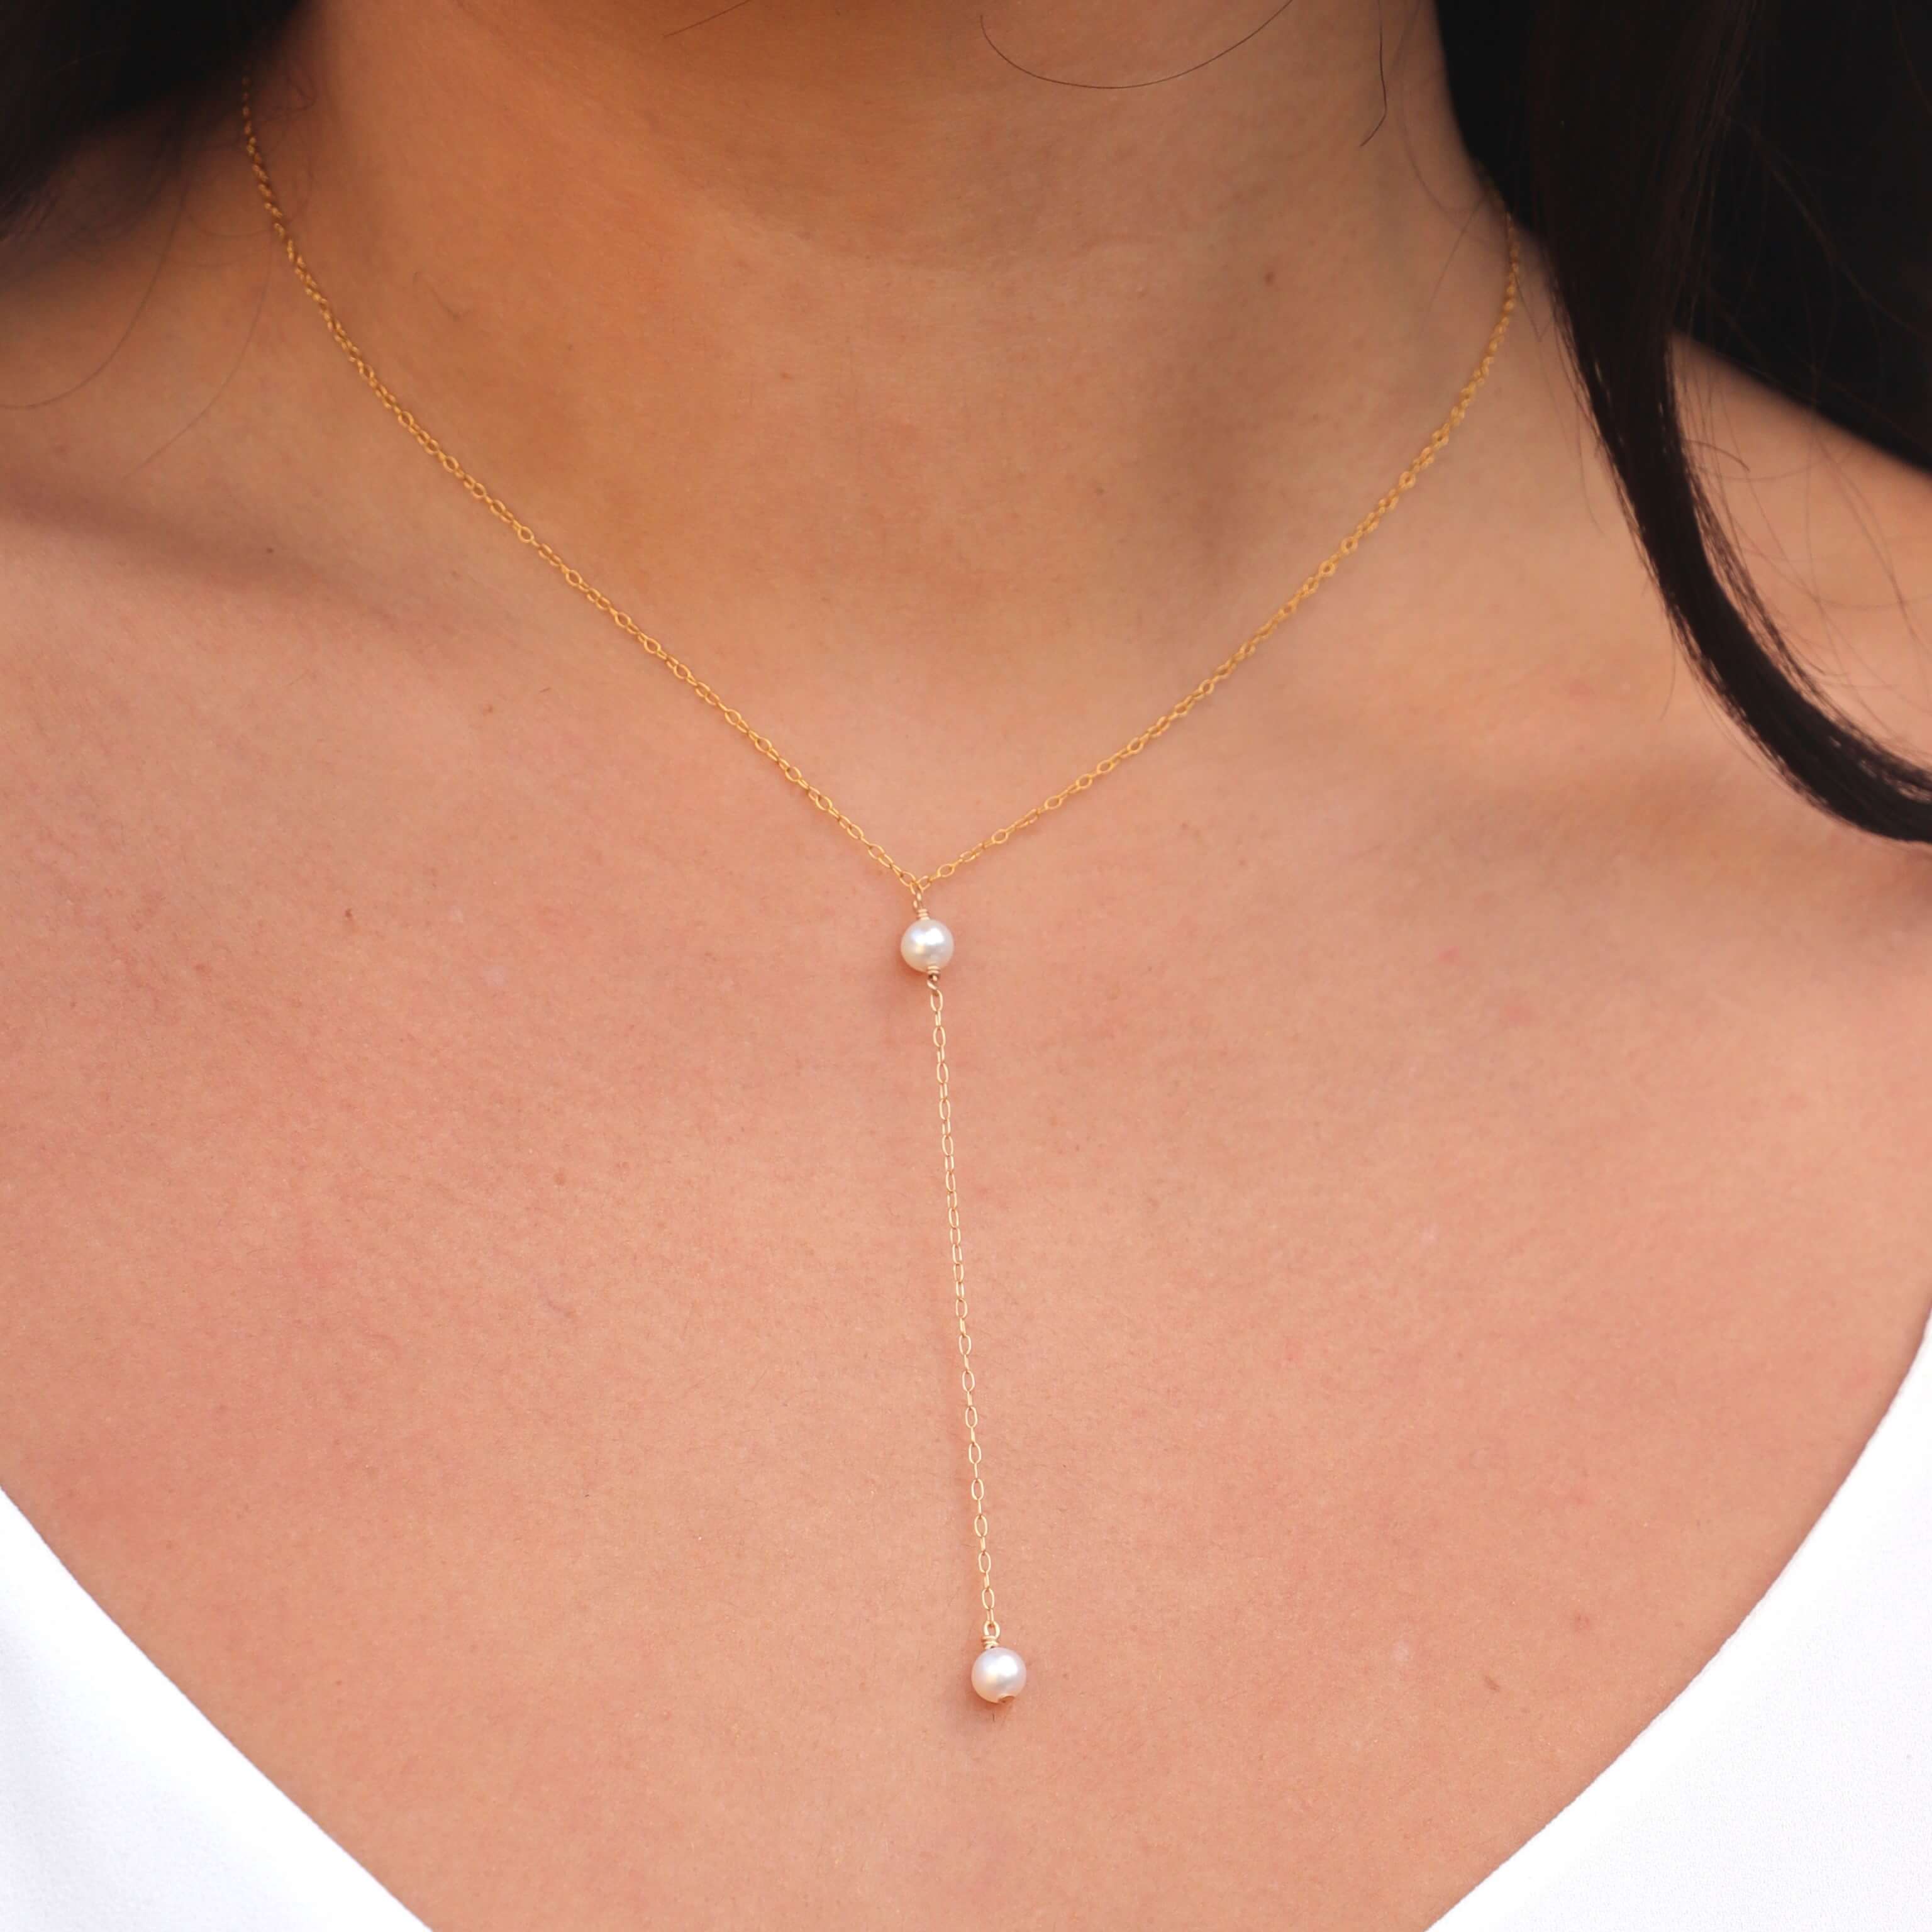 gold filled pearl chain necklace close up on model